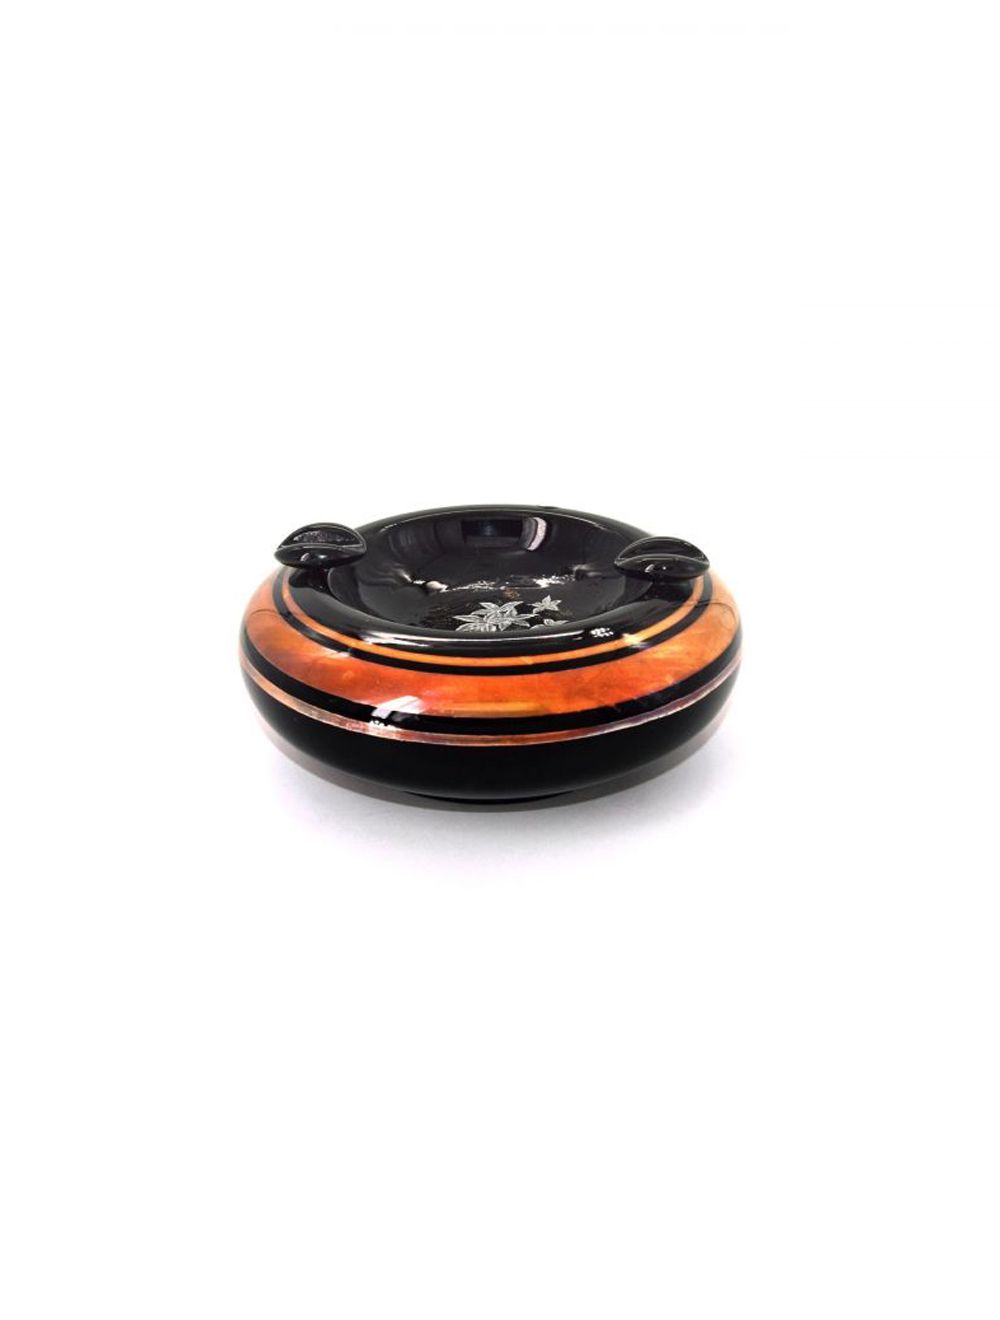 Ashtray Black With Brown Colored Round Design